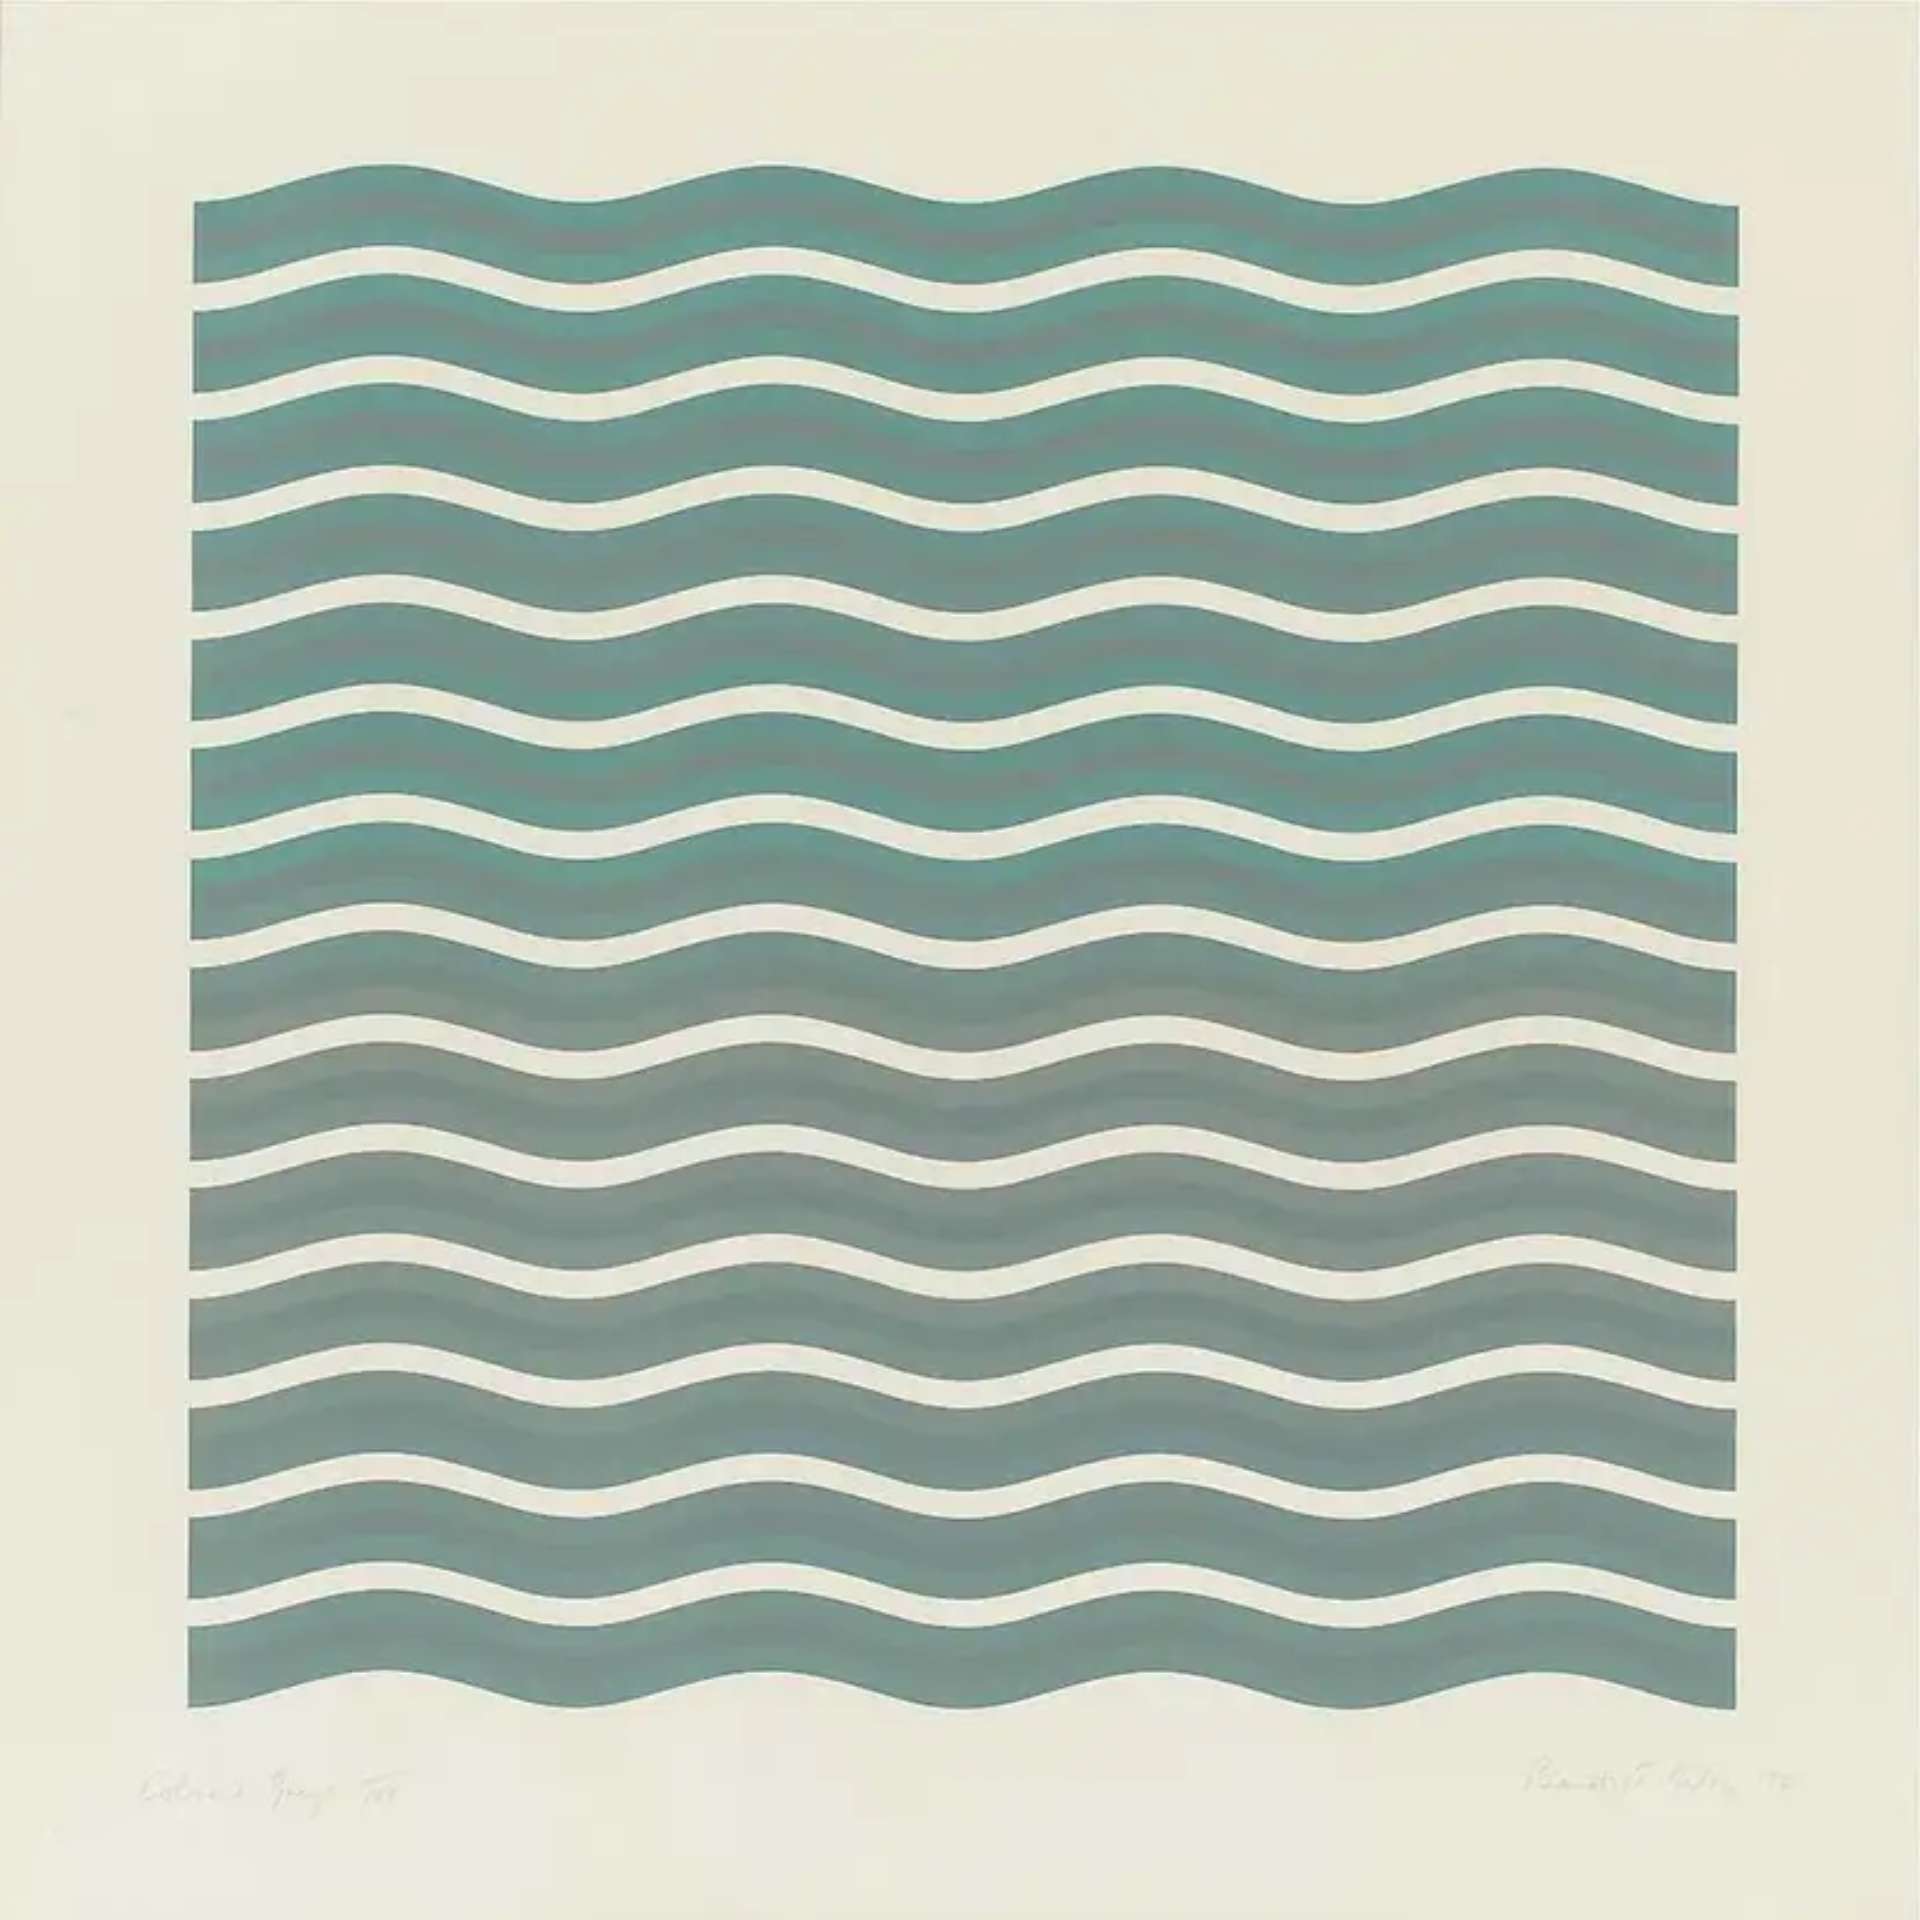 Bridget Riley's Artistic Journey: From Cornwall to Egypt